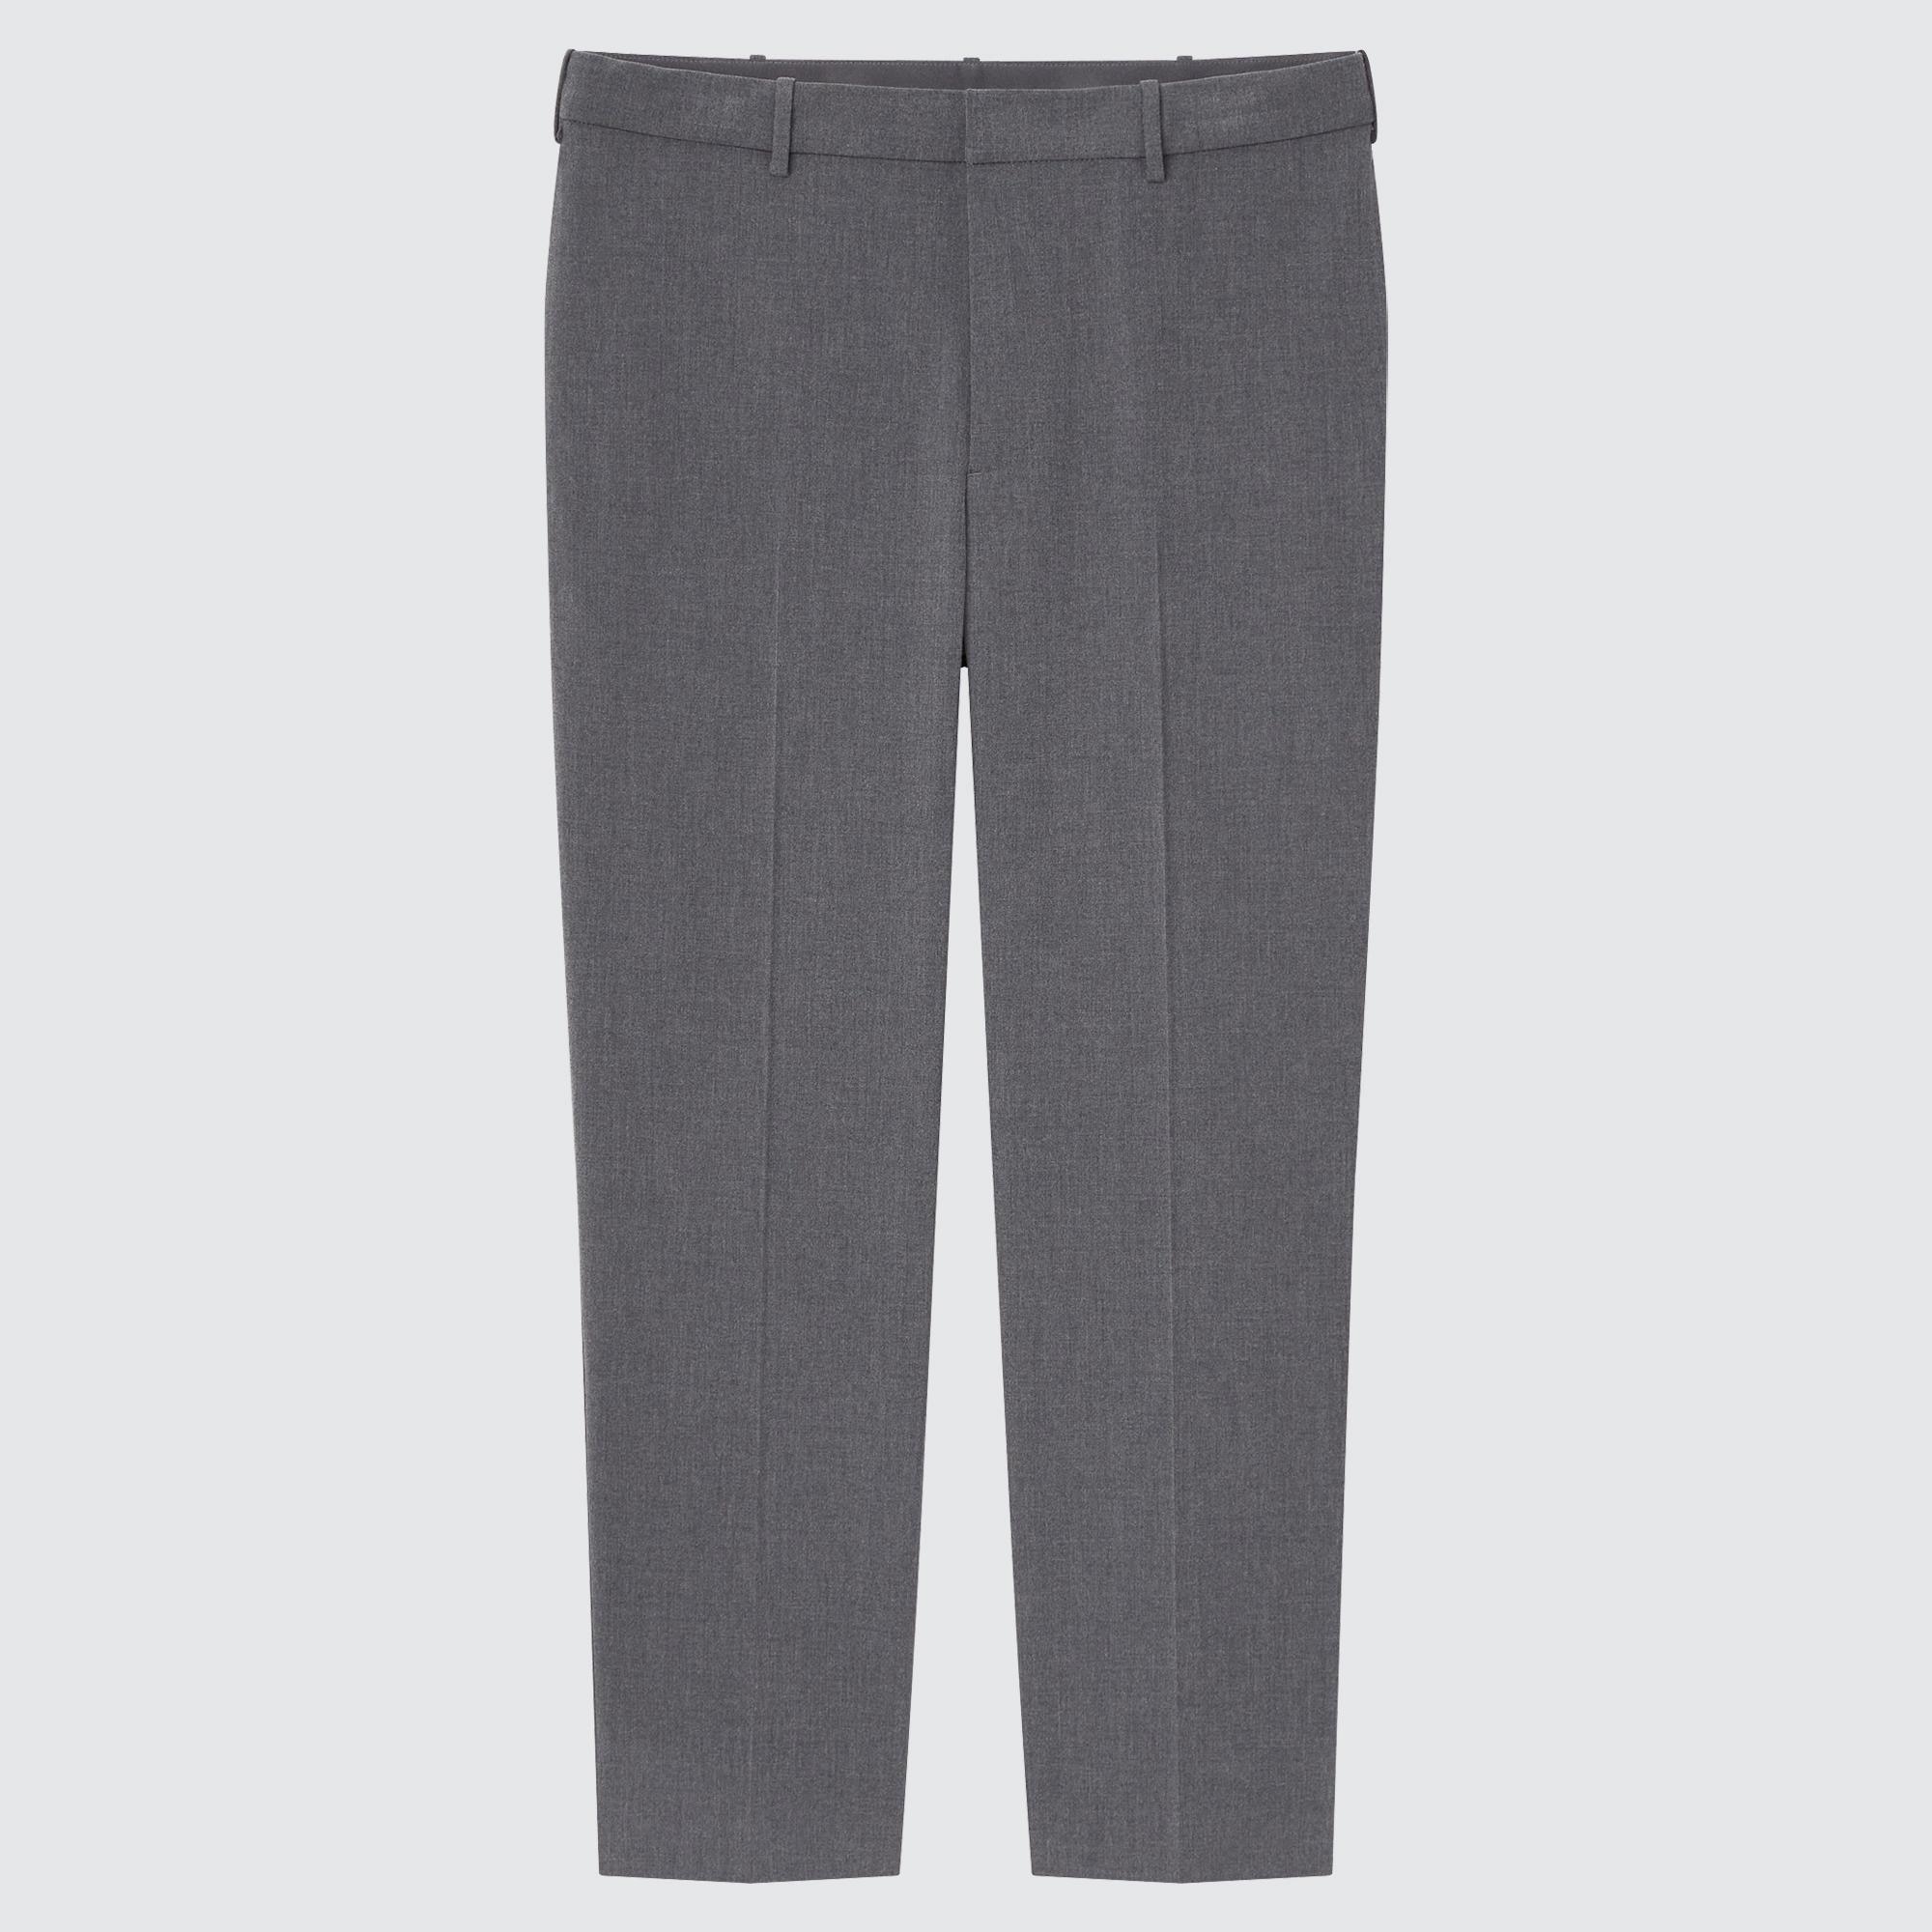 UNIQLO MEN Slim Fit Pants Mens Fashion Bottoms Trousers on Carousell